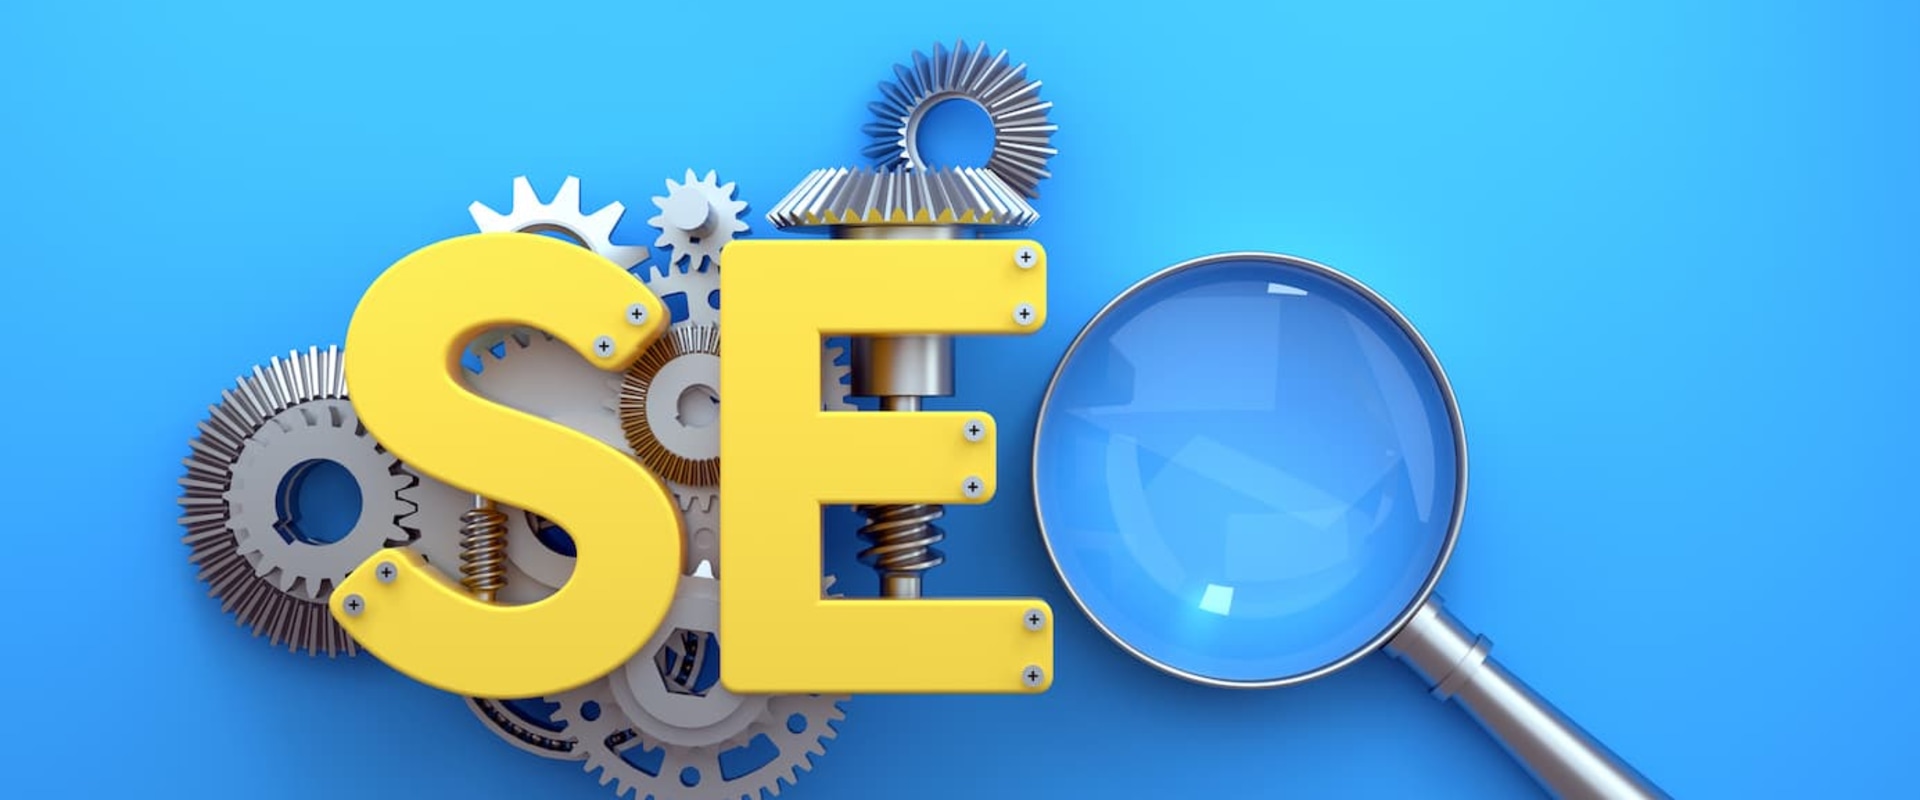 How do you do search engine optimization?